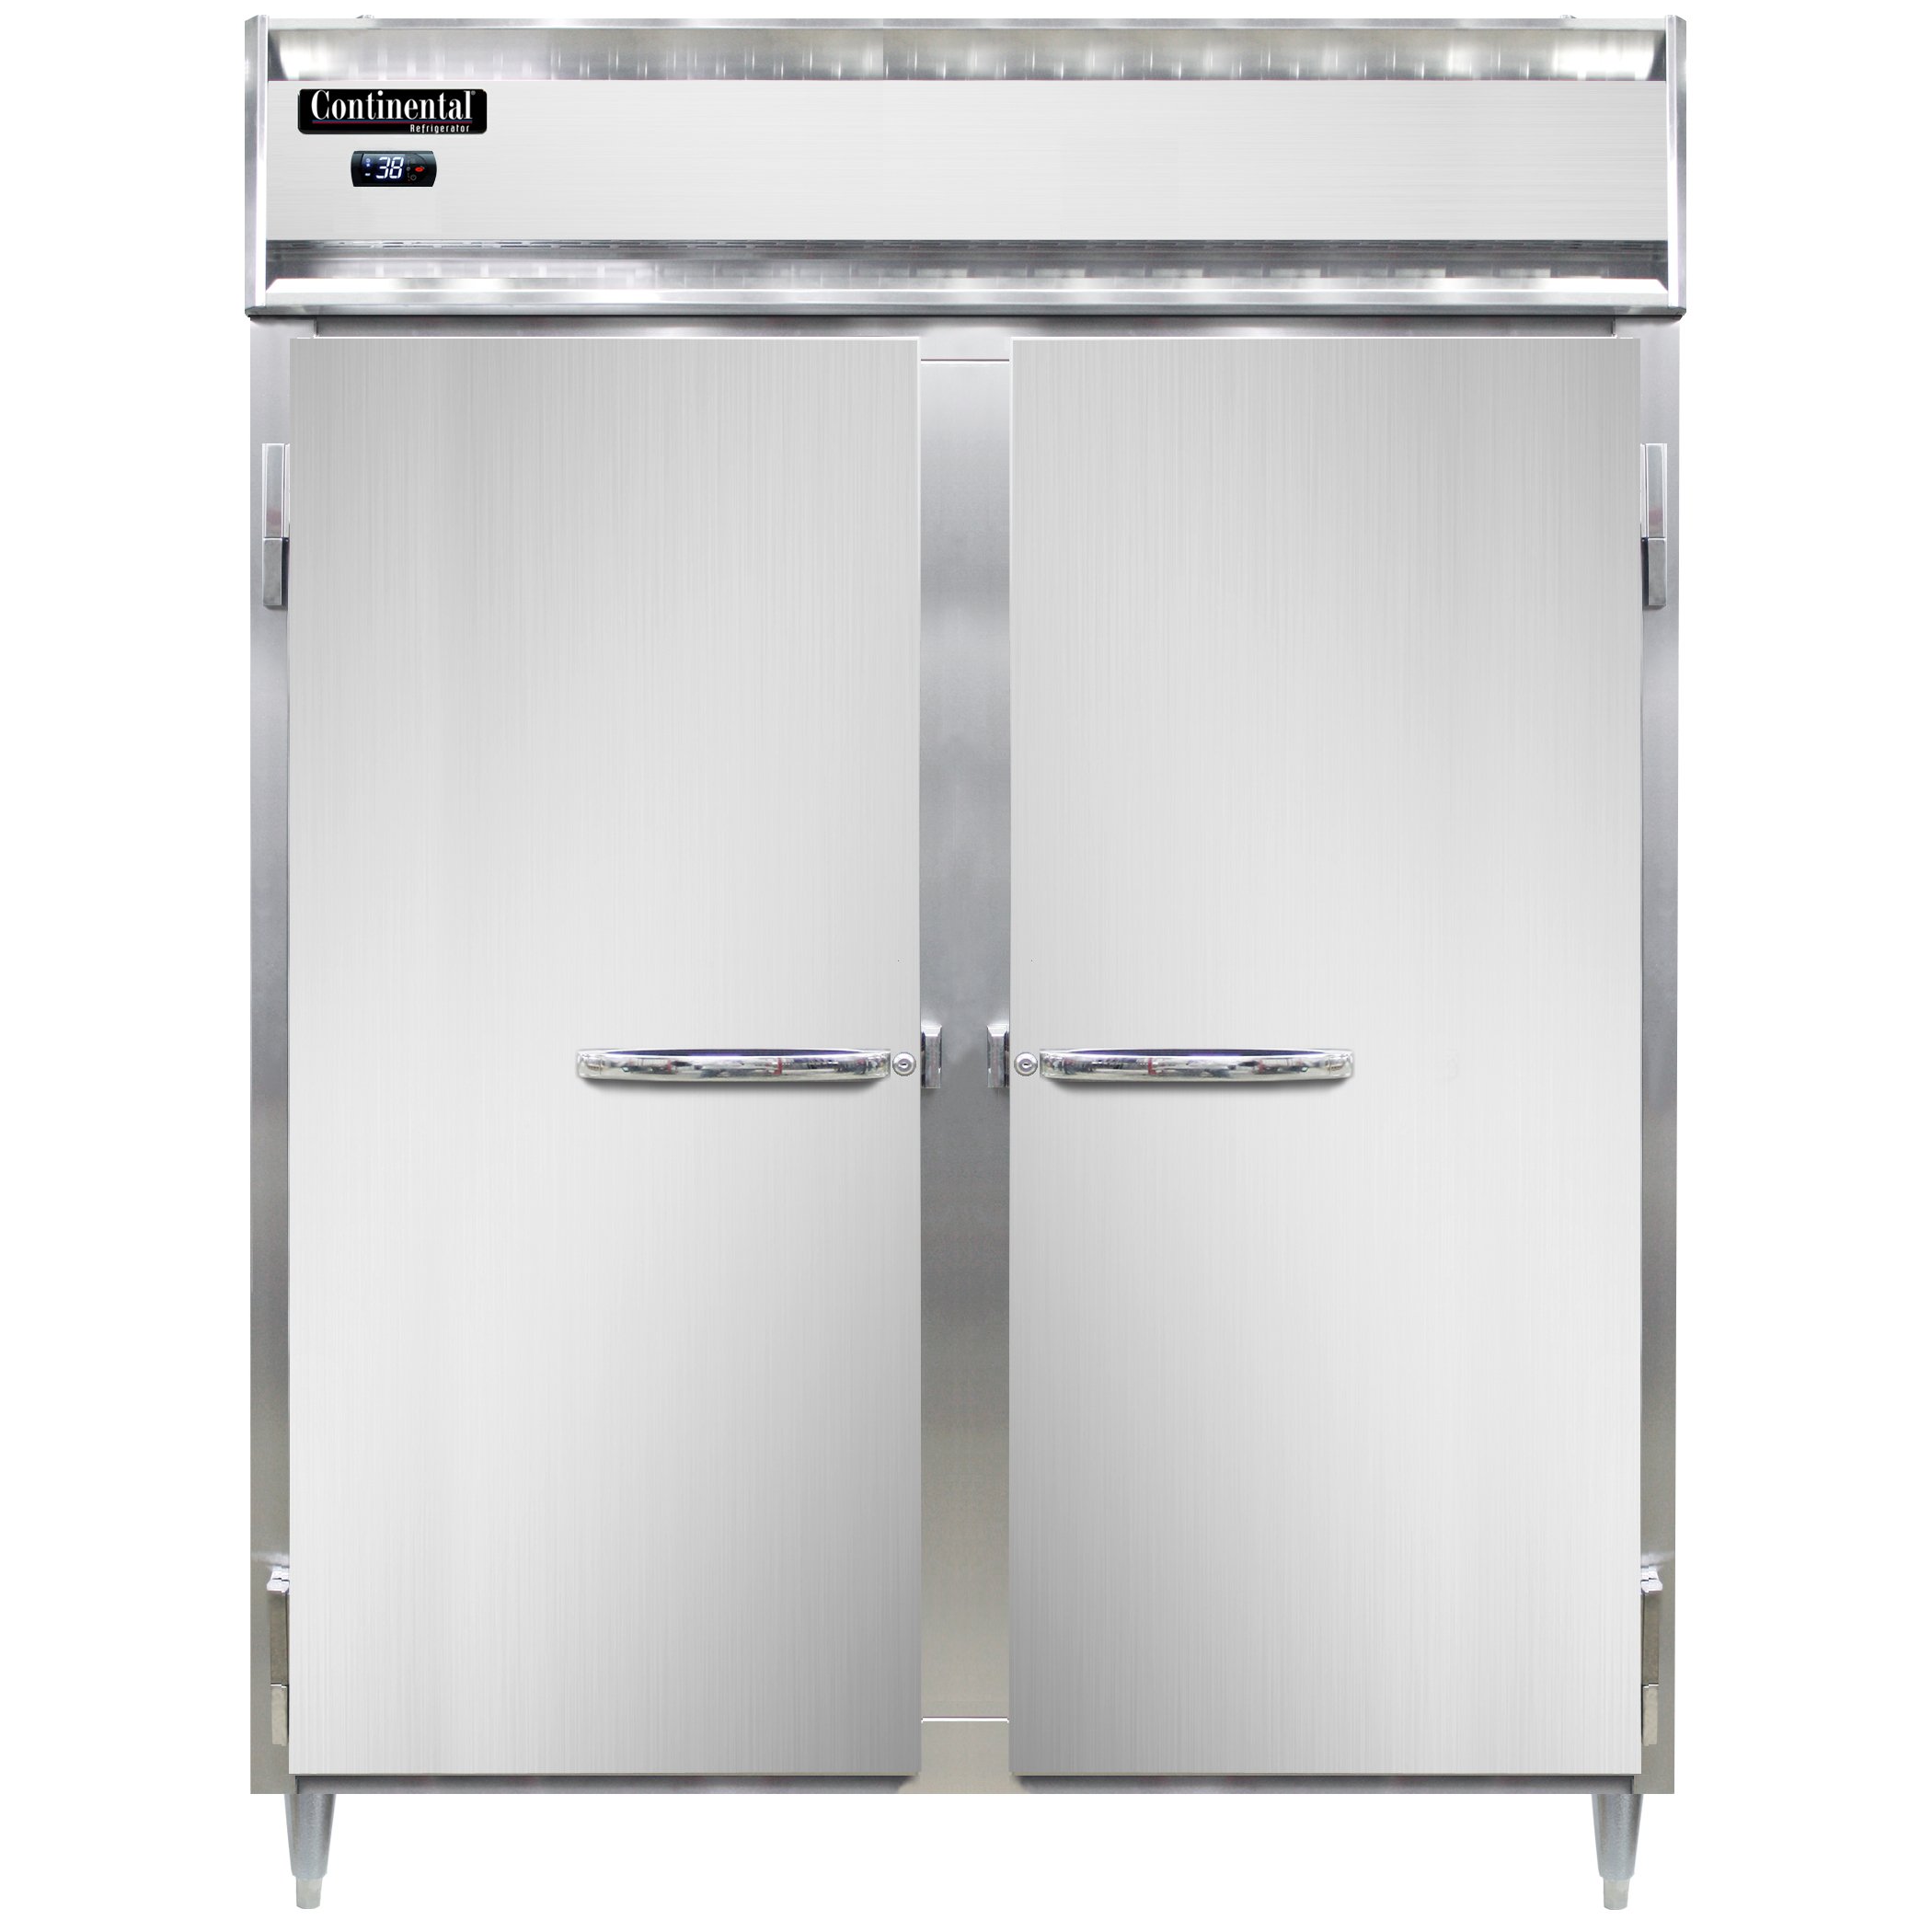 Continental Refrigerator D2REN 57″ Reach-In Refrigerator w/ 2 Sections, 2 Solid Doors, 52 cu. ft.